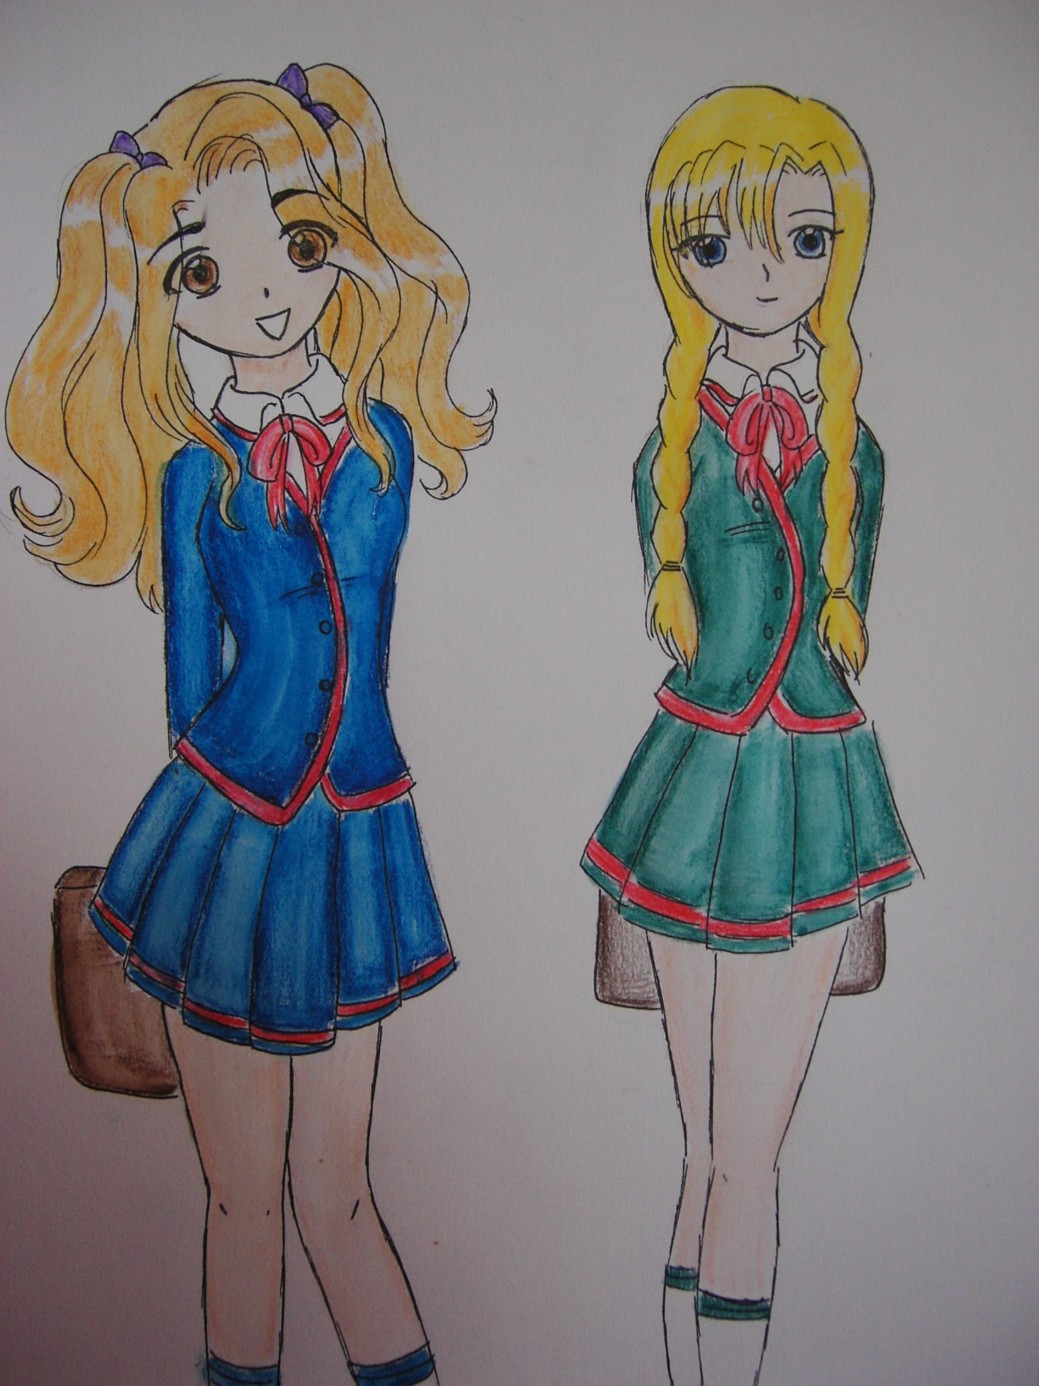 Sarah and Layla going to school by Kalhysha